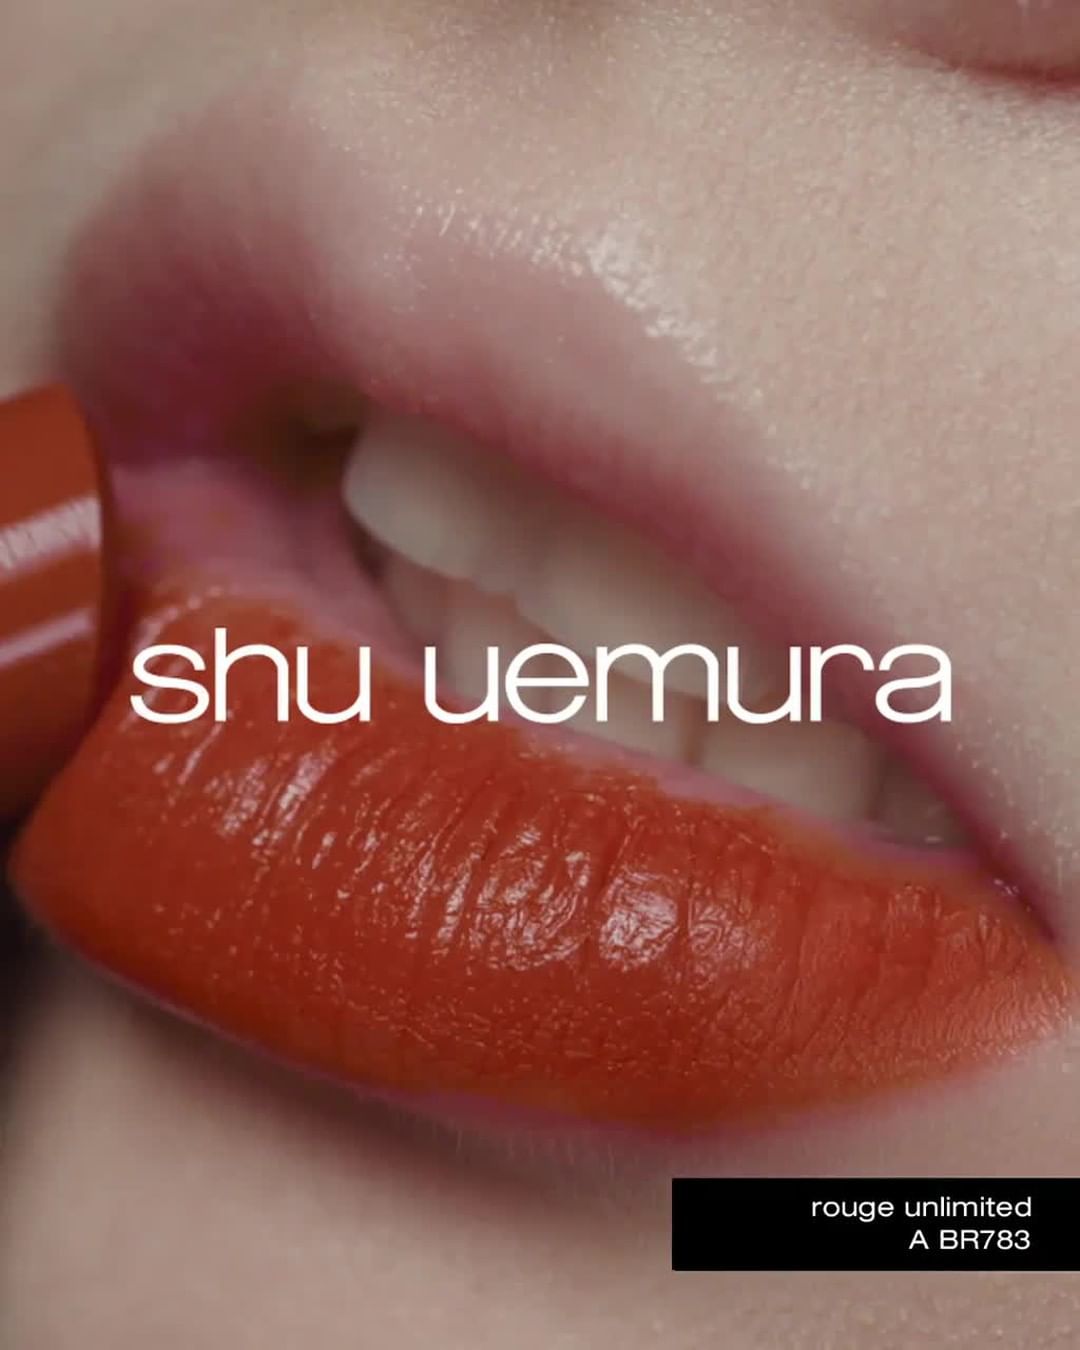 shu uemura - express yourself with the bold, vivid color intensity⁠ of rouge unlimited amplified BR783.⁠
#shuuemura #shuartistry #rougeunlimited